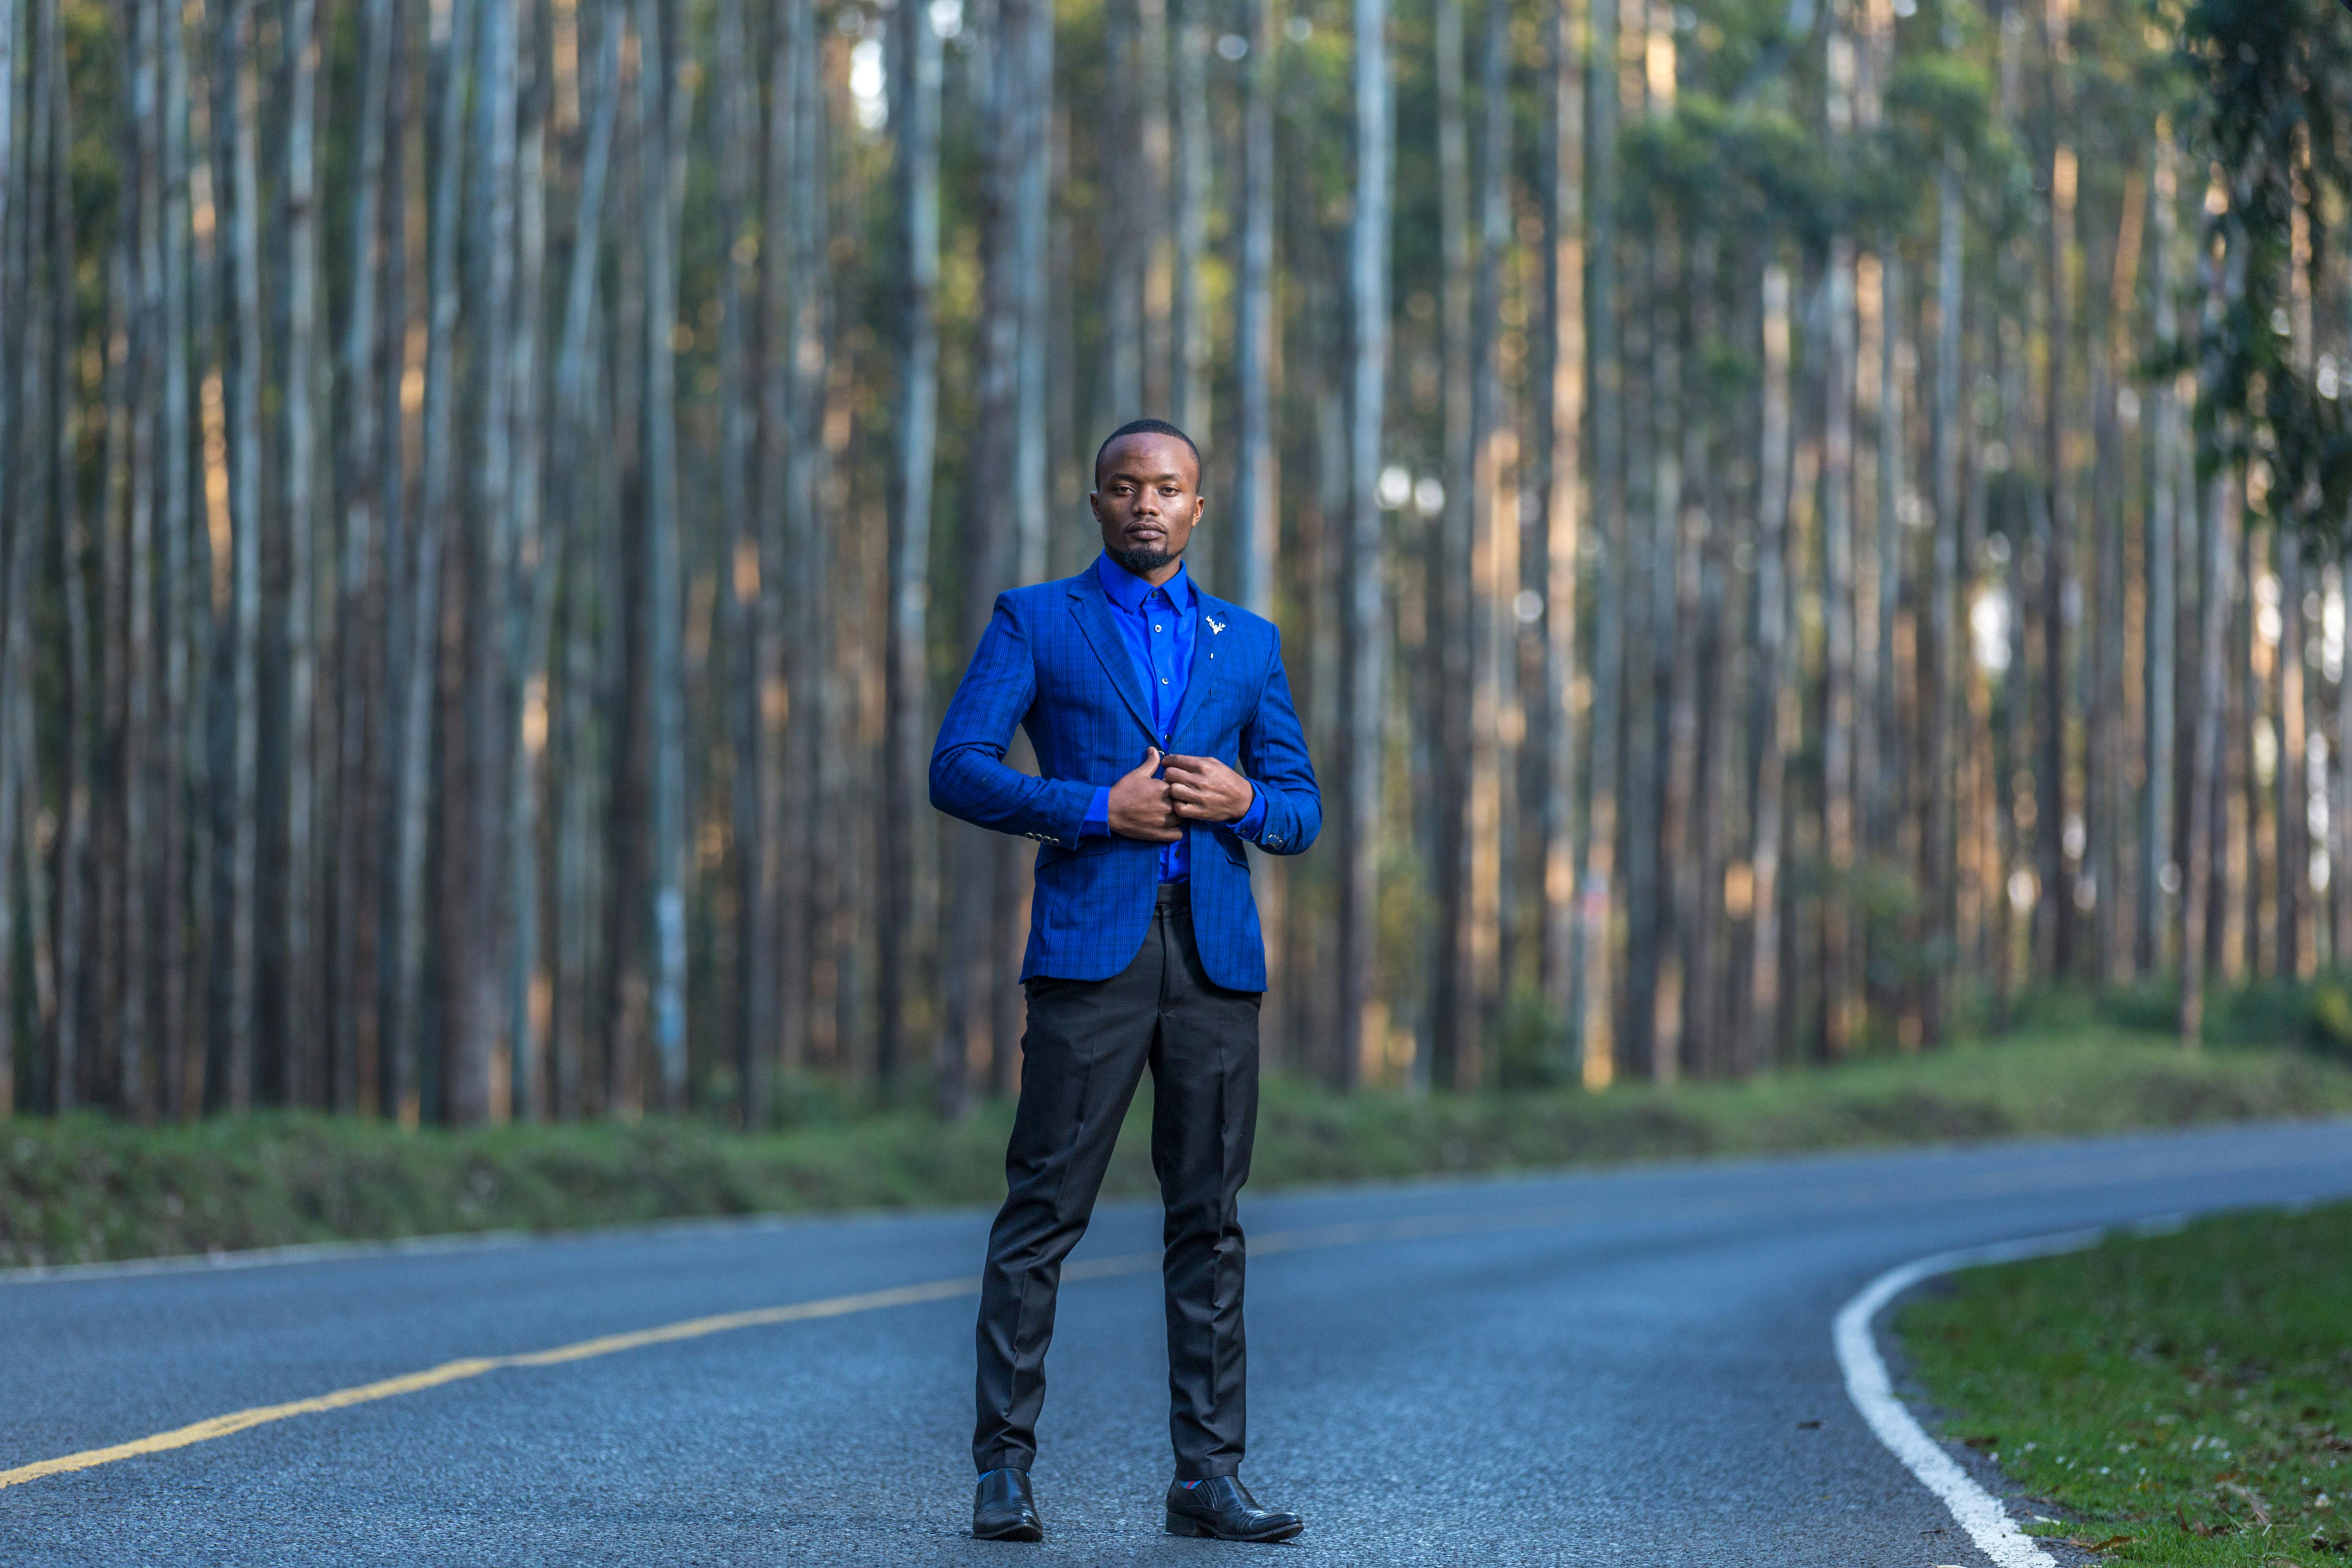 man in suit posing on road outdoors